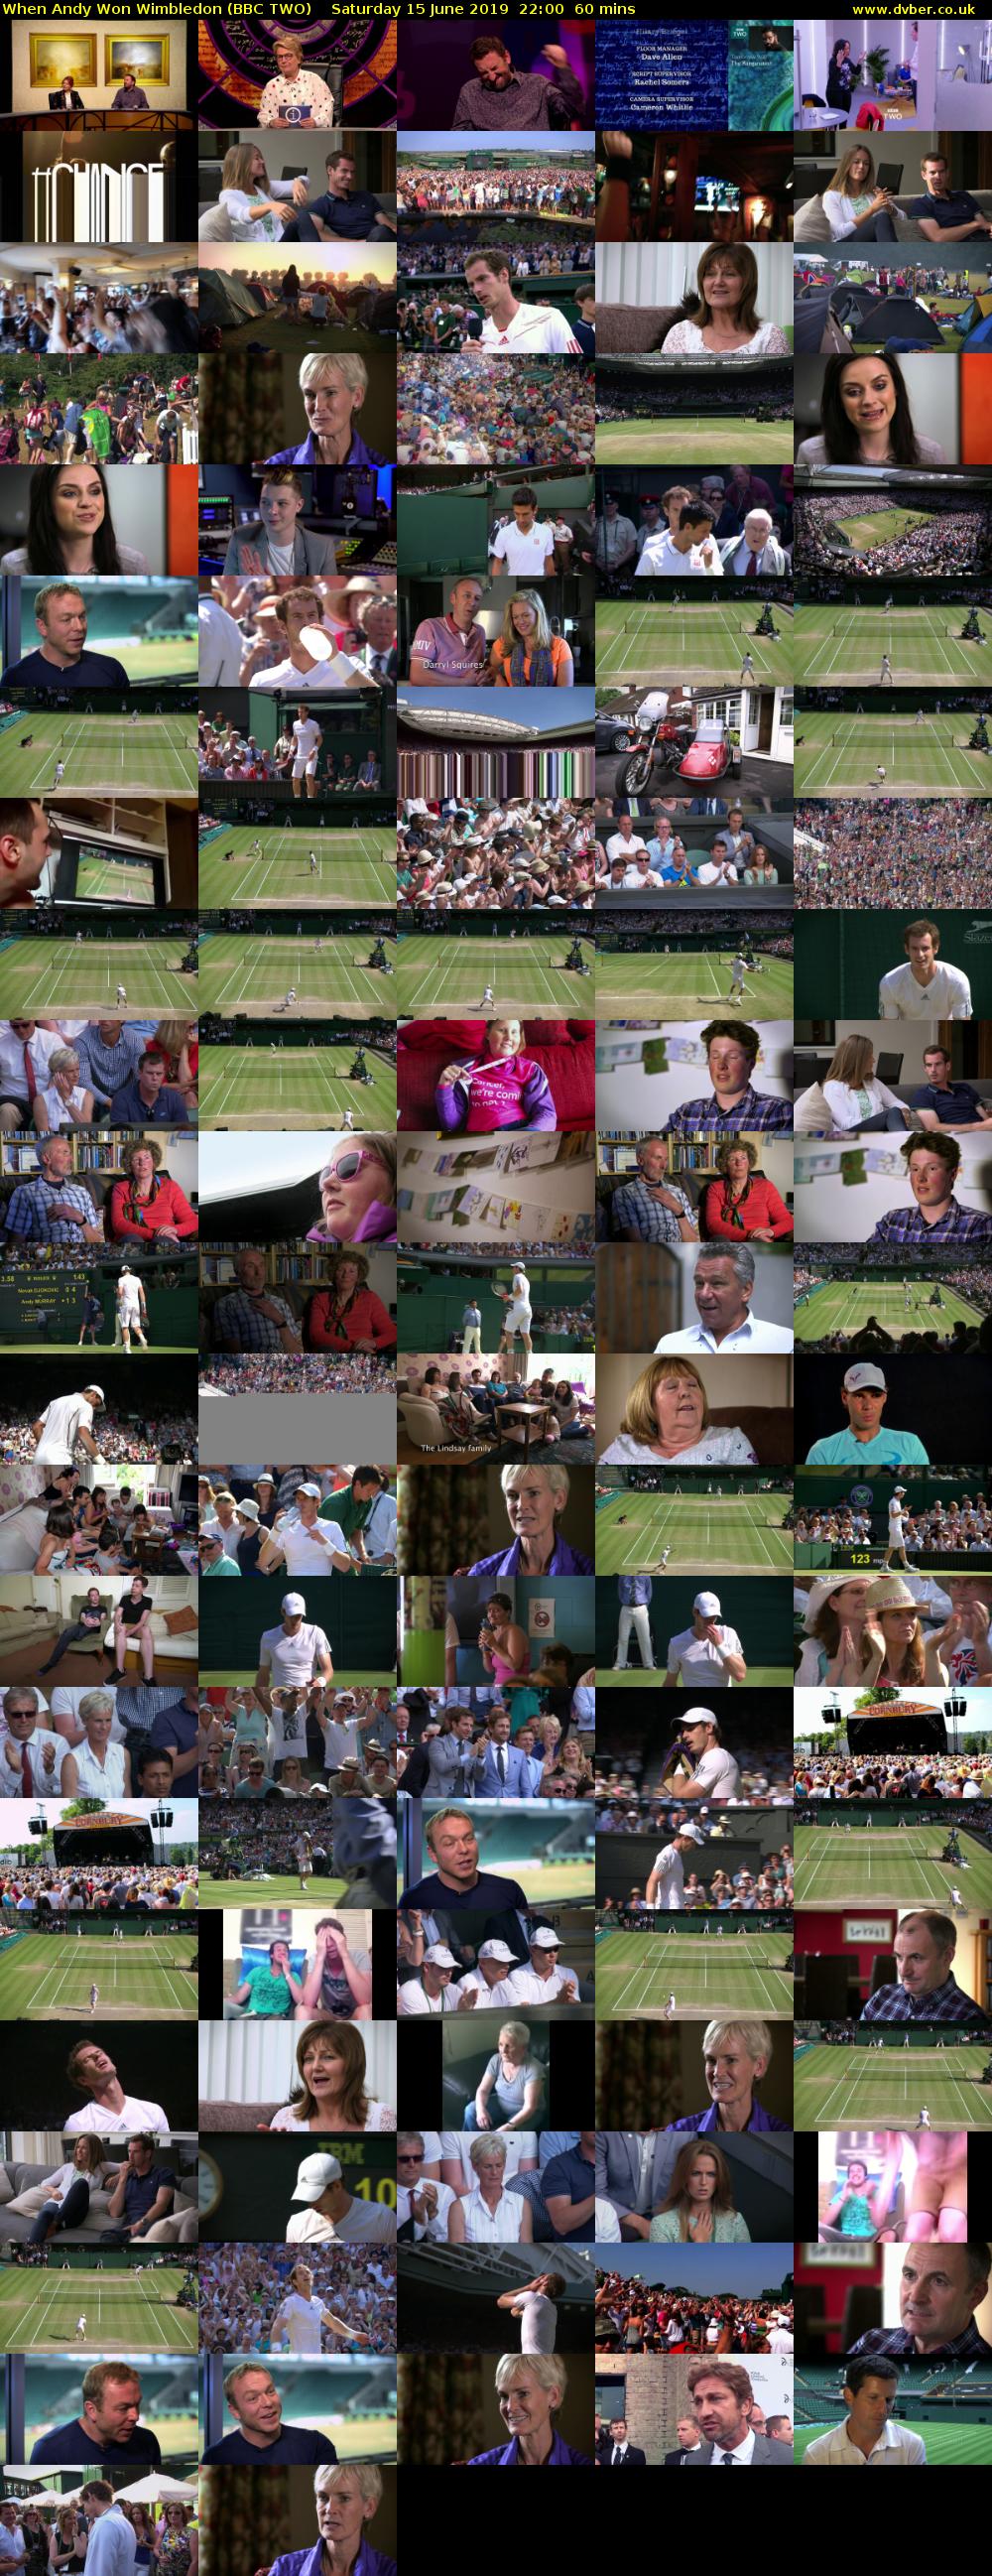 When Andy Won Wimbledon (BBC TWO) Saturday 15 June 2019 22:00 - 23:00